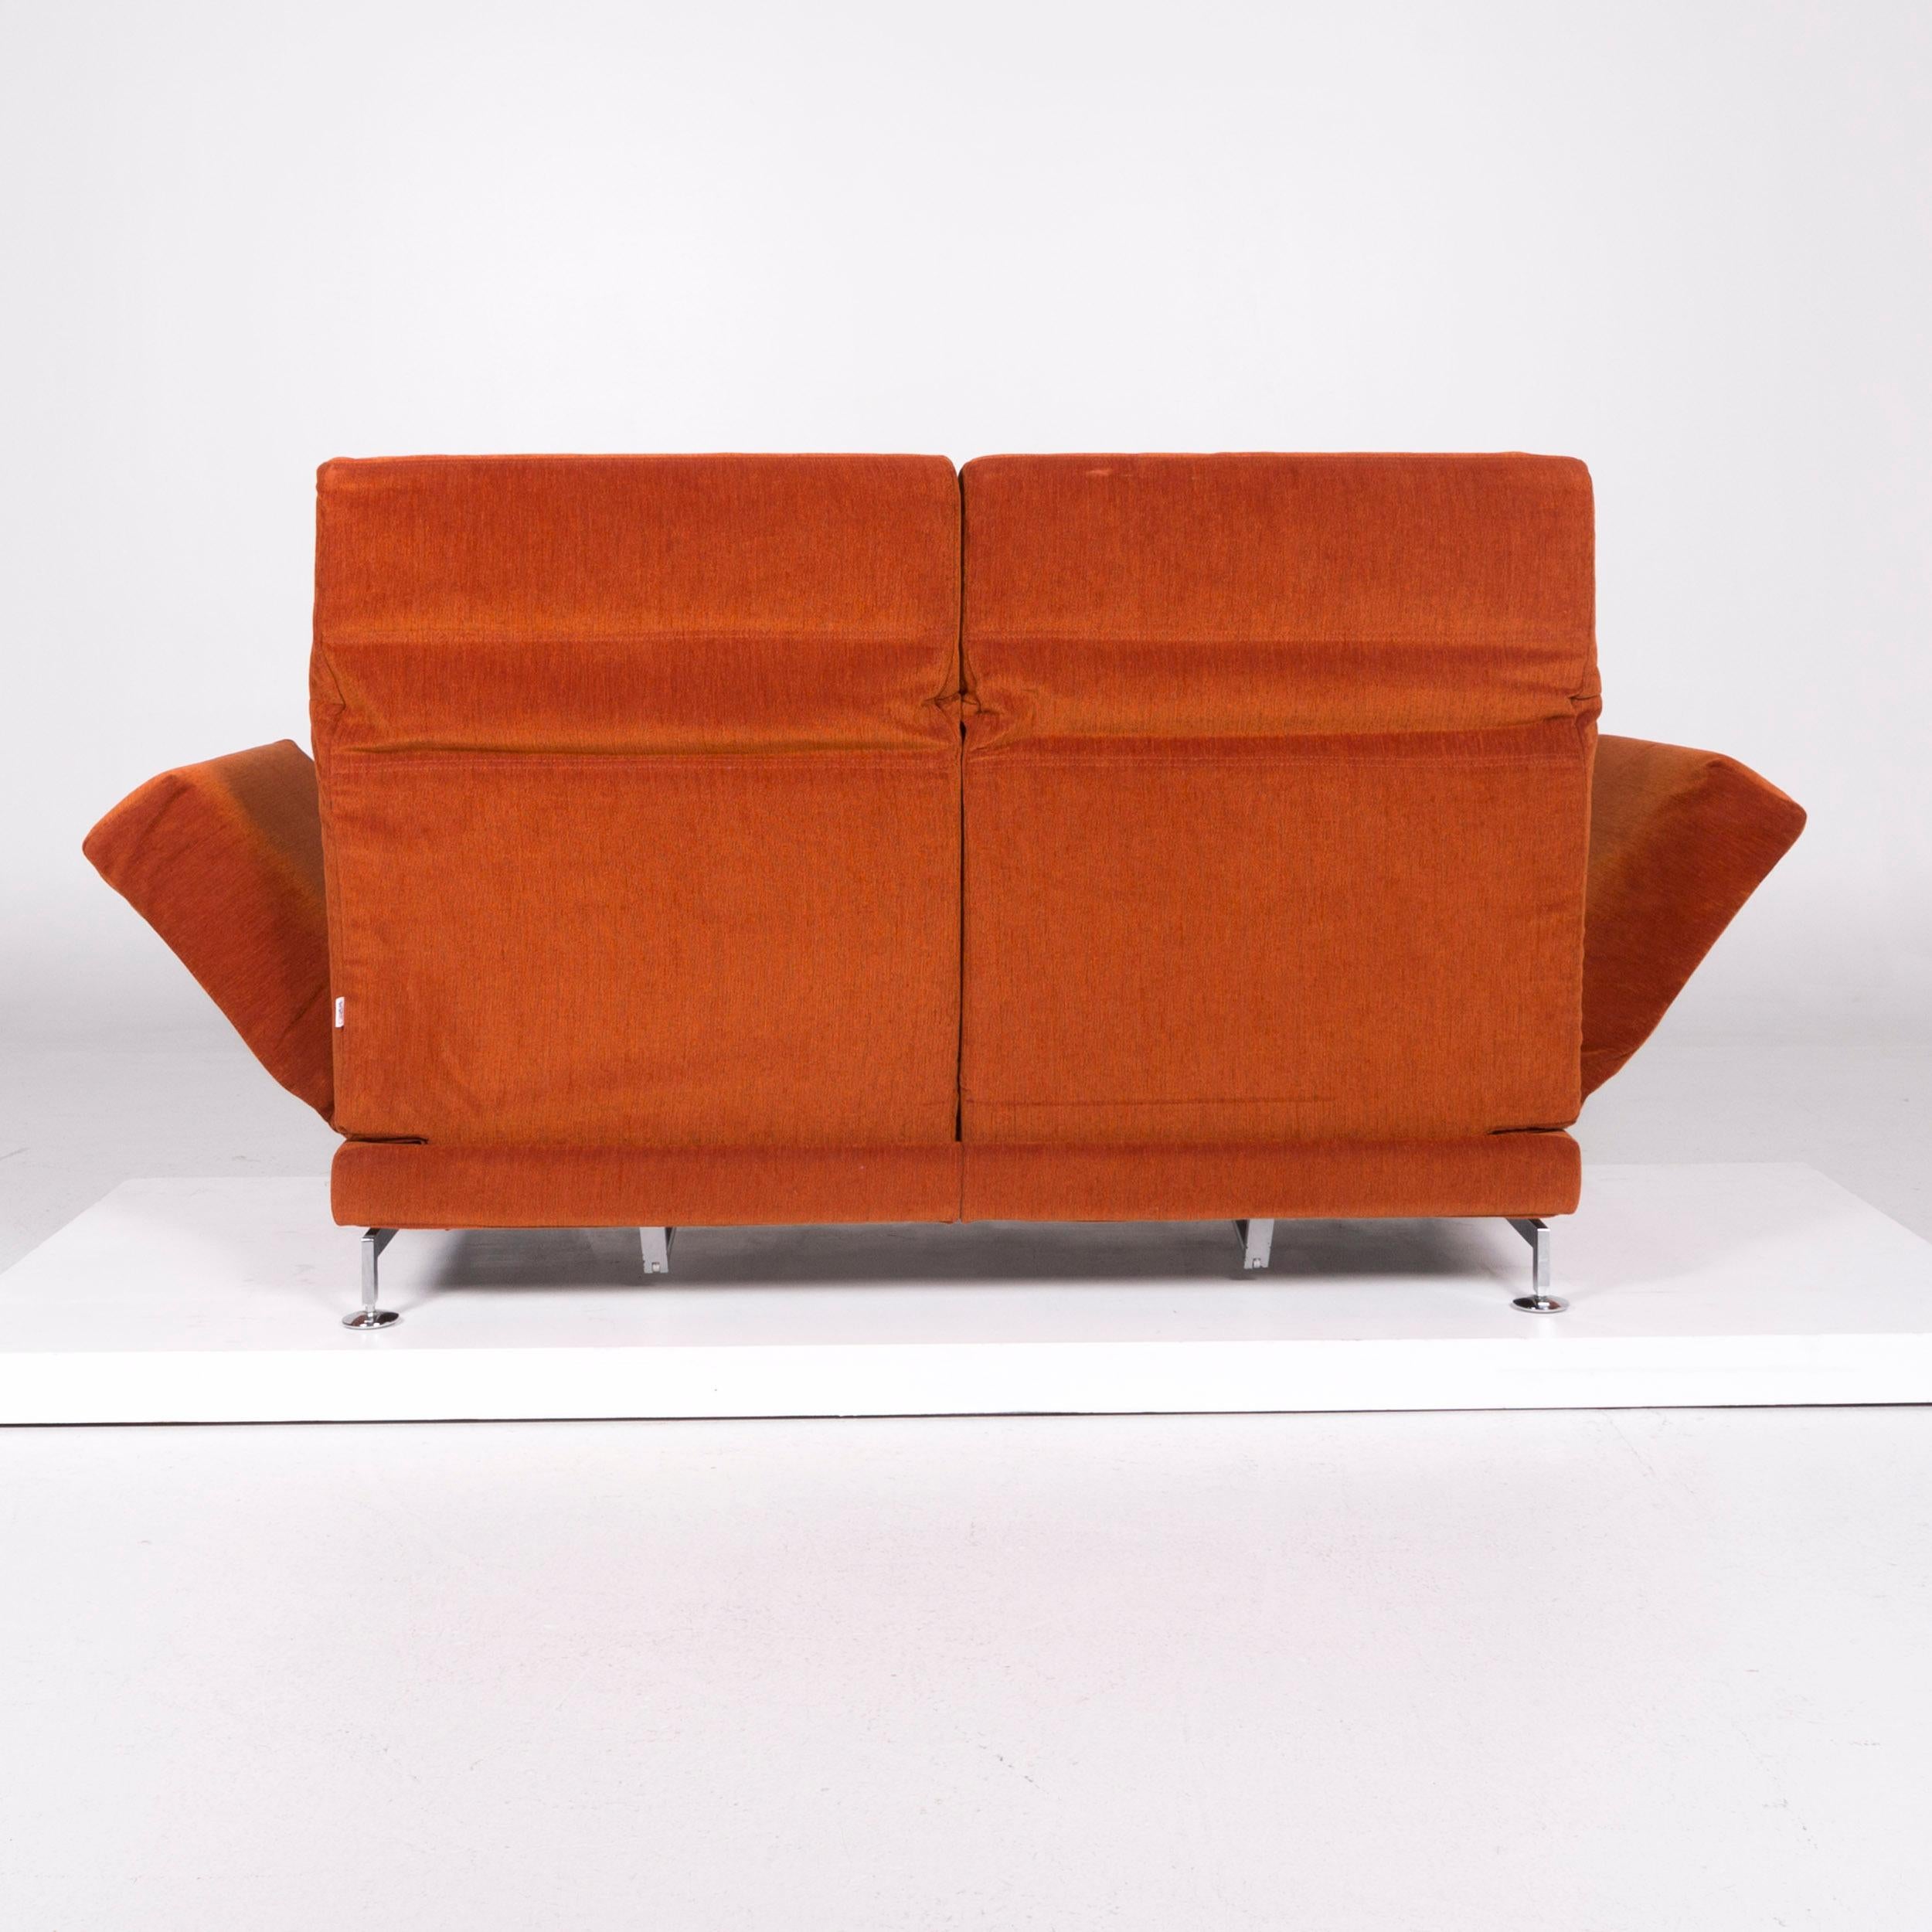 Brühl & Sippold Moule Fabric Sofa Orange Two-Seat Incl. Function 2